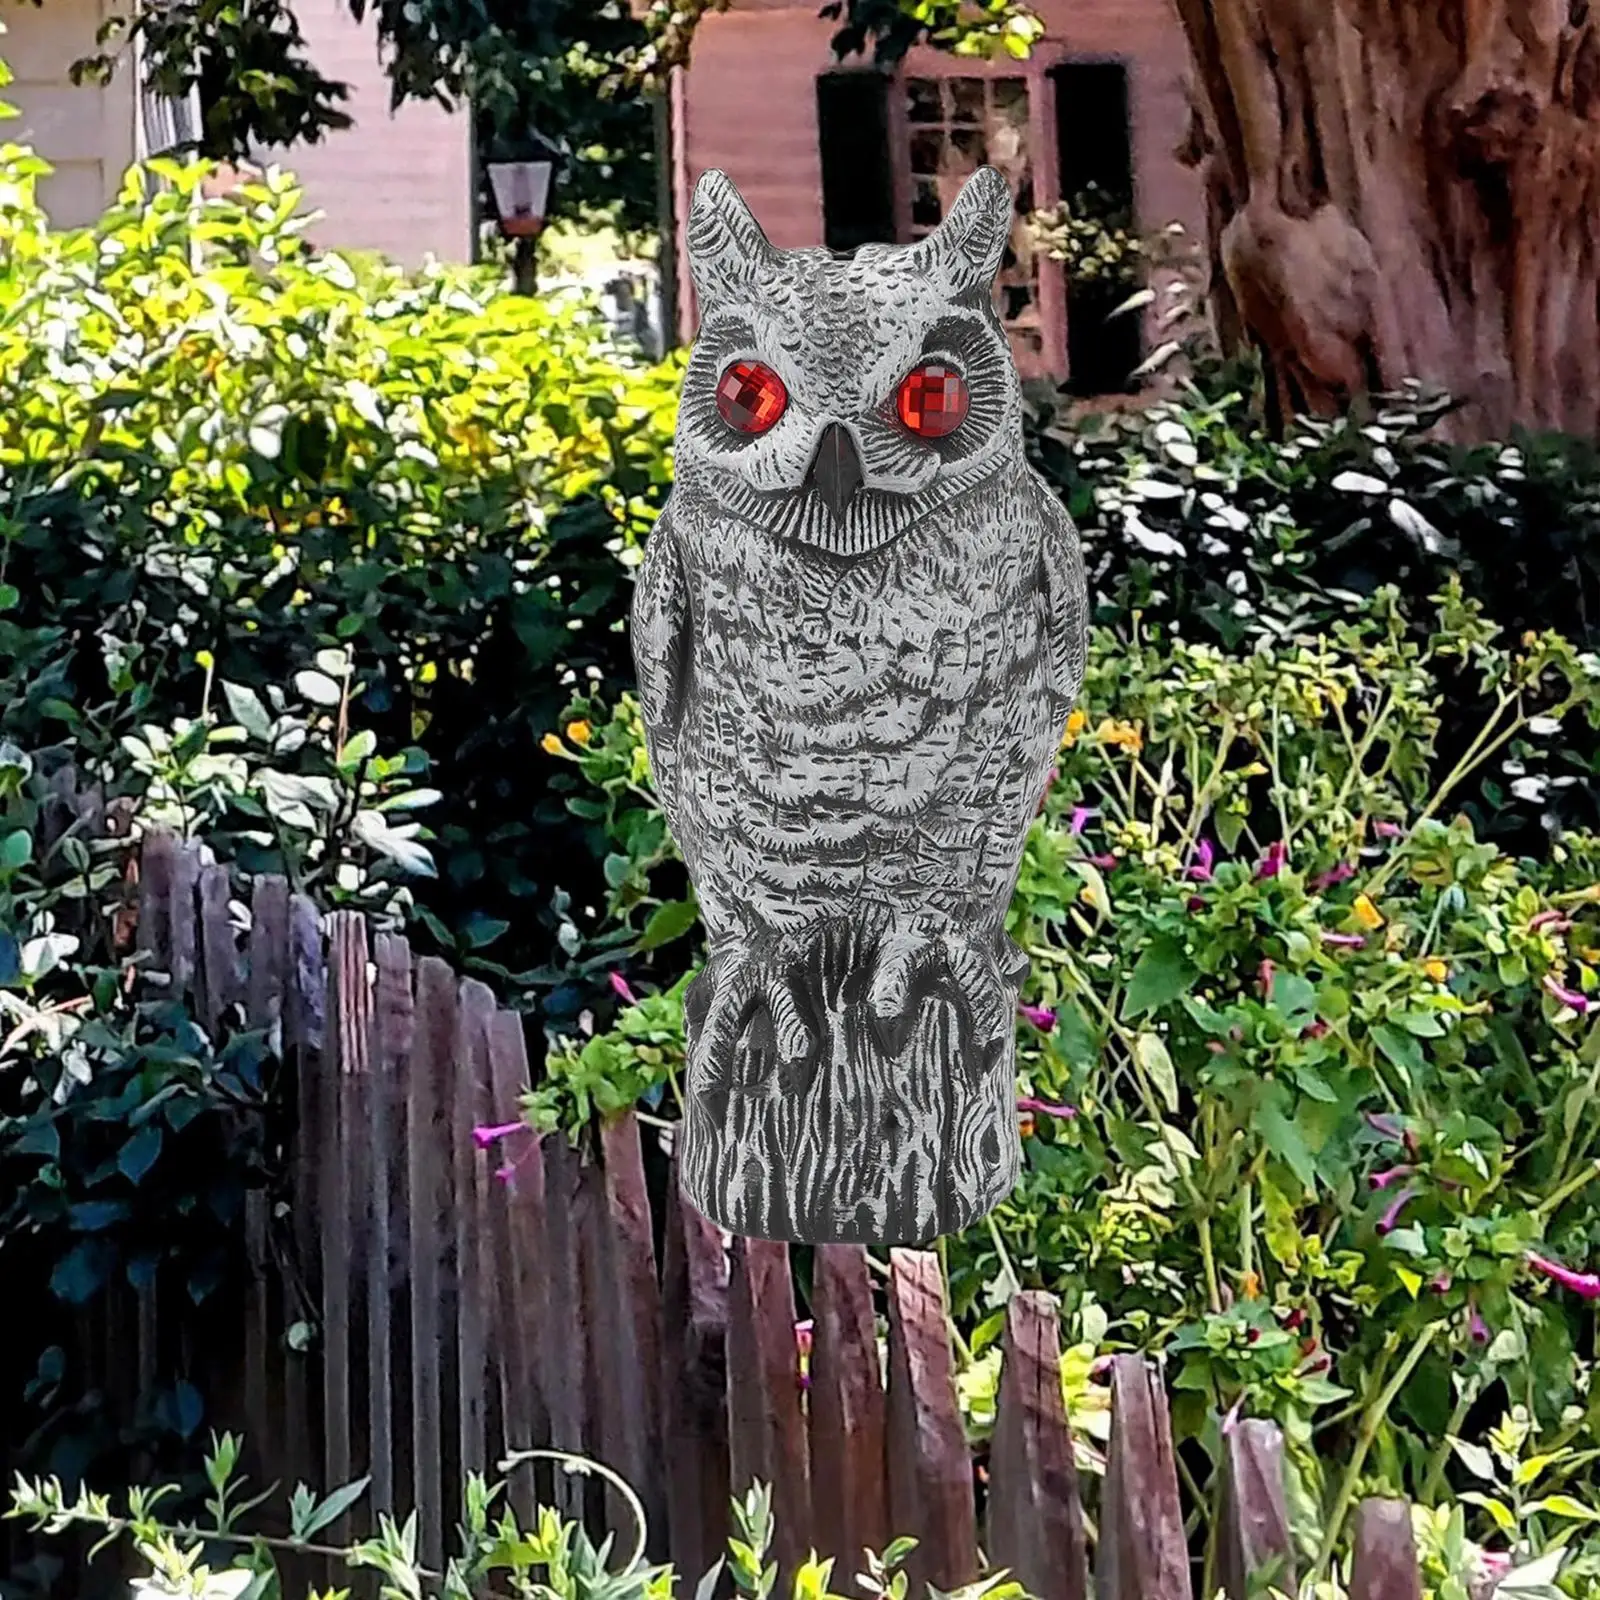 Fake Owl Bird Deterrent Scary Decor Sparrows Owl bird Deterrents Device Away Decoration for Home Vegetable